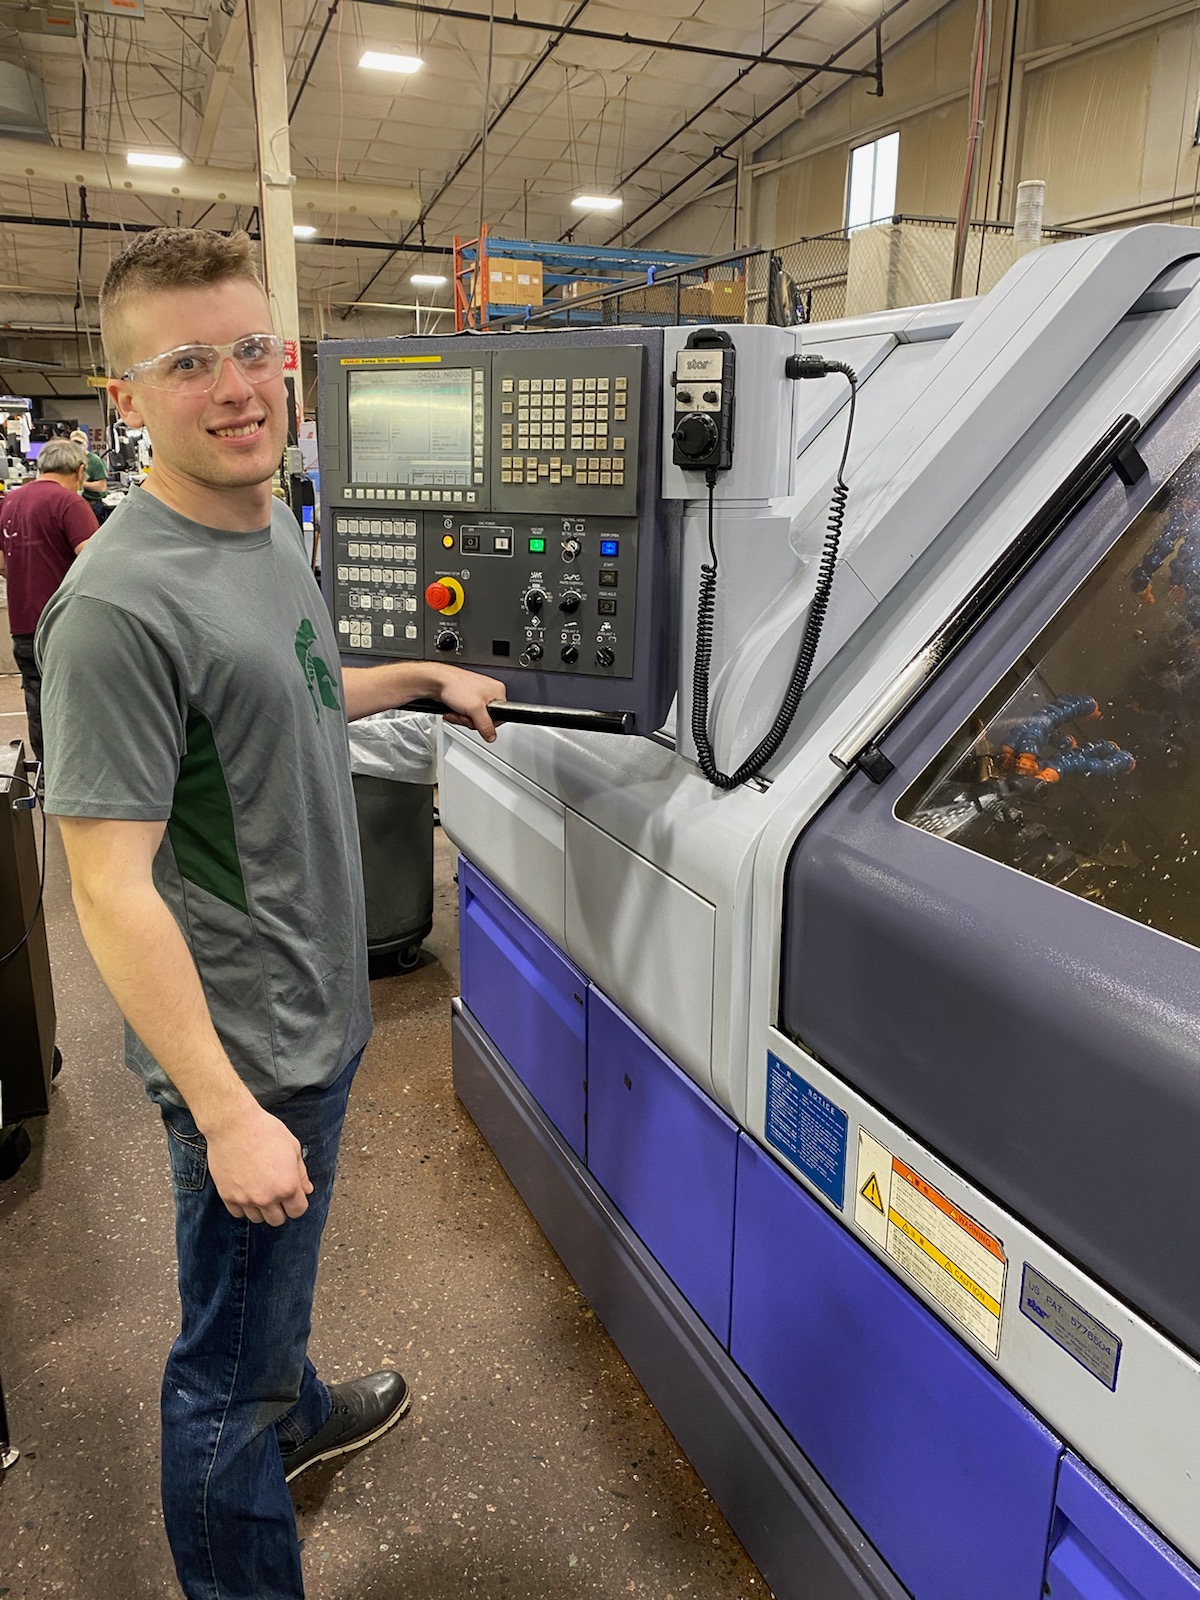 Nick stands in front of a CNC machine at work.